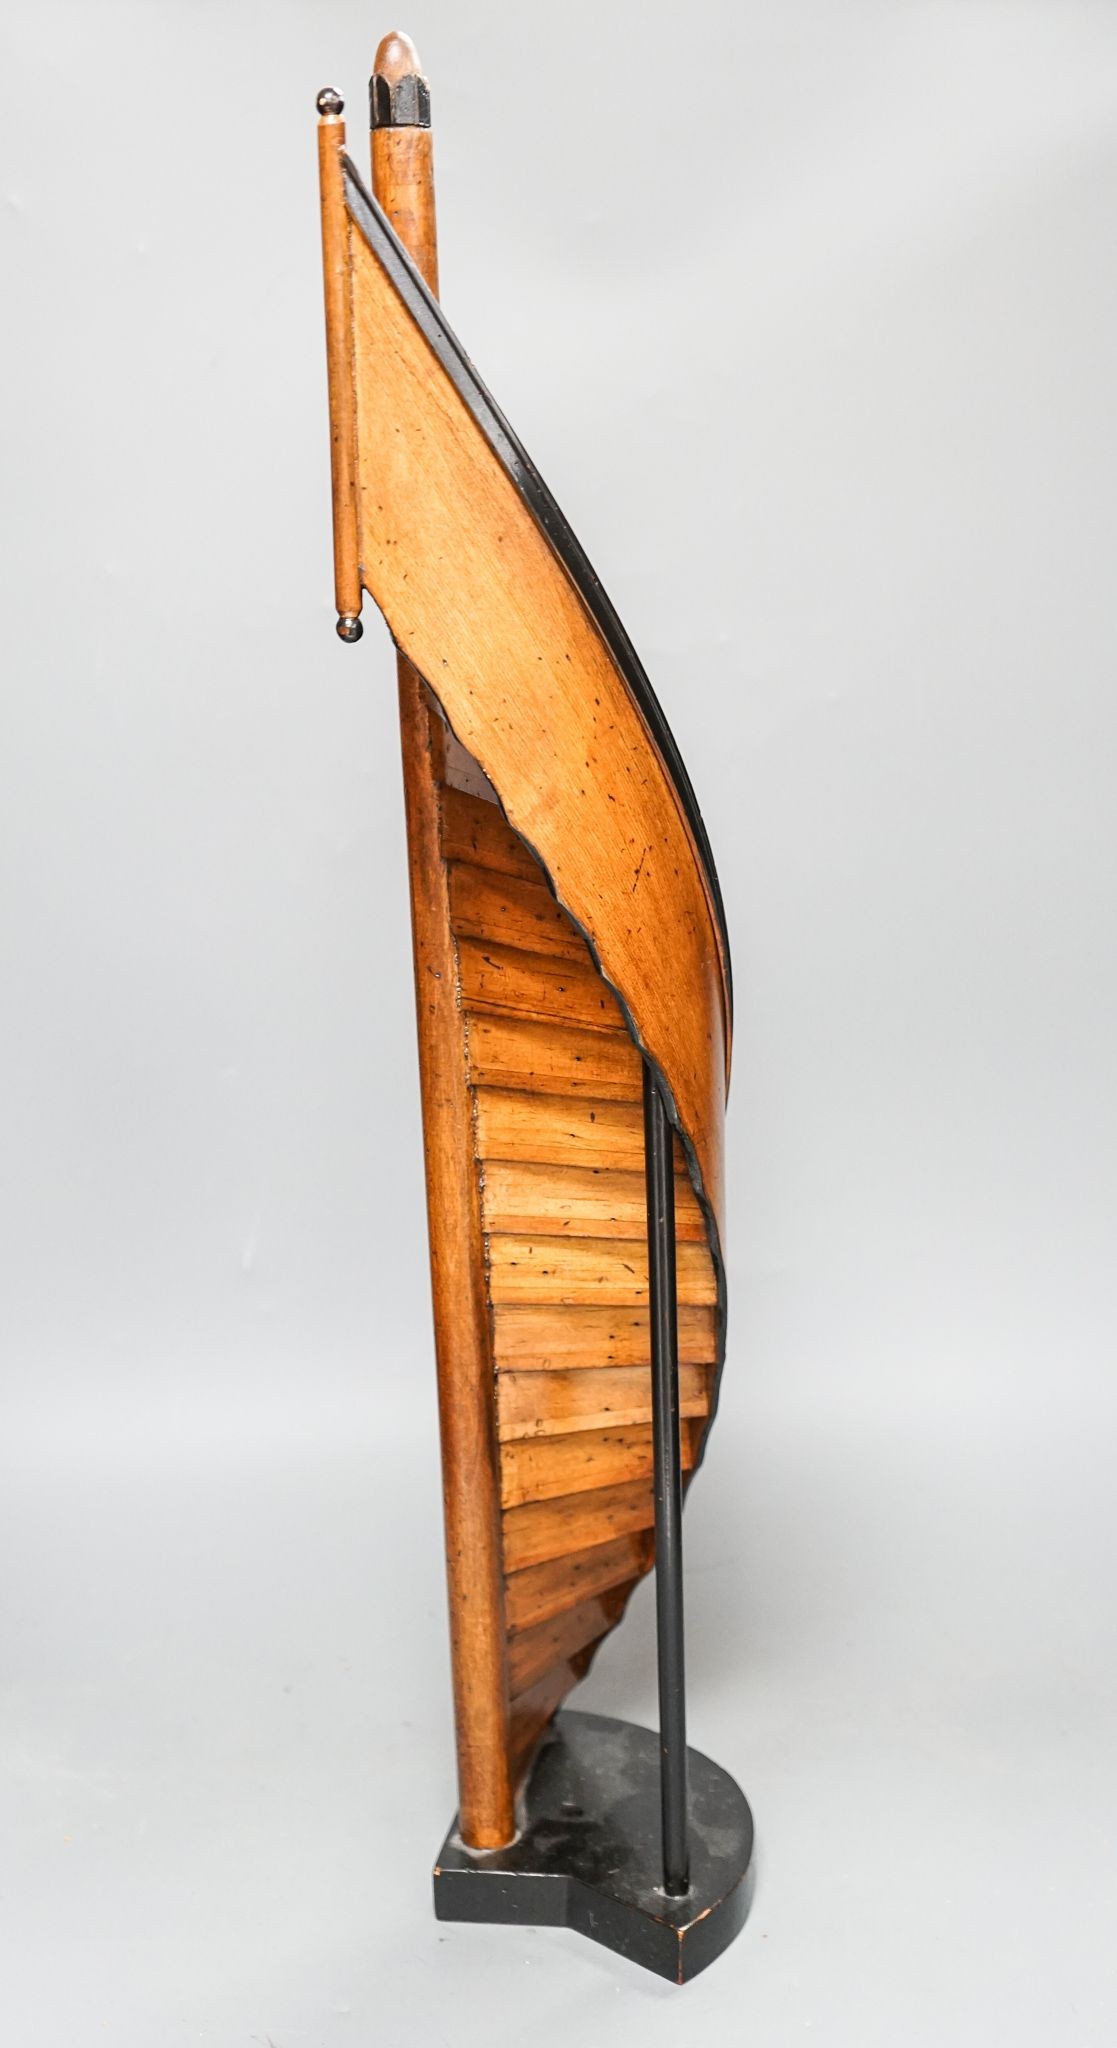 A reproduction fruitwood model spiral staircase 62cm